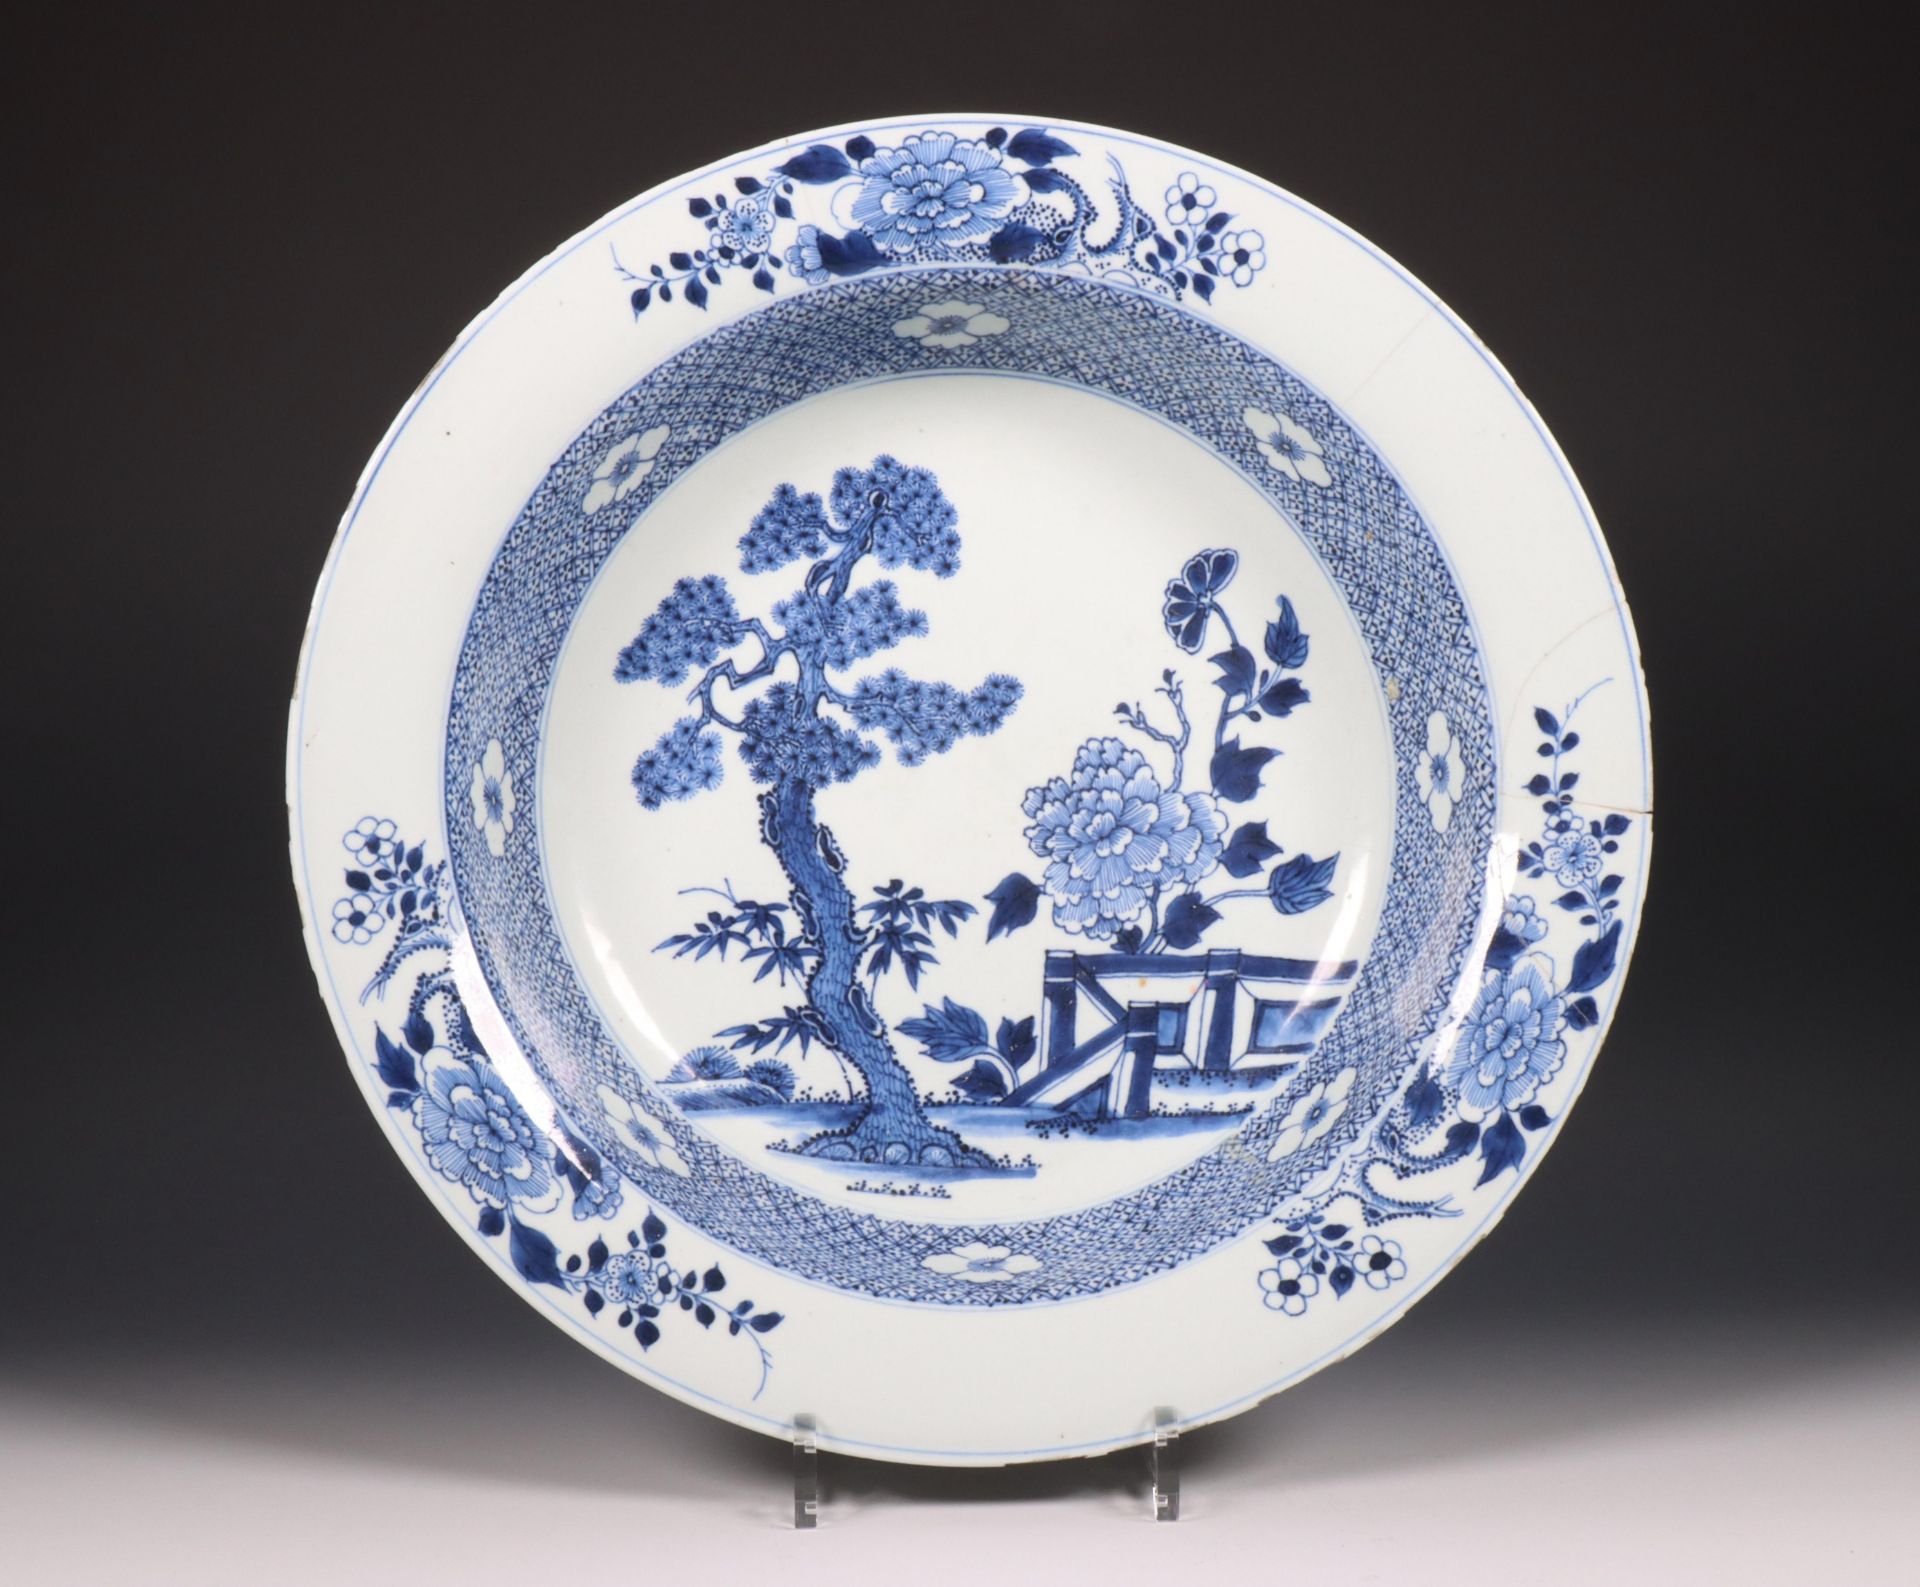 China, large blue and white porcelain serving dish, Qianlong period (1736-1795),